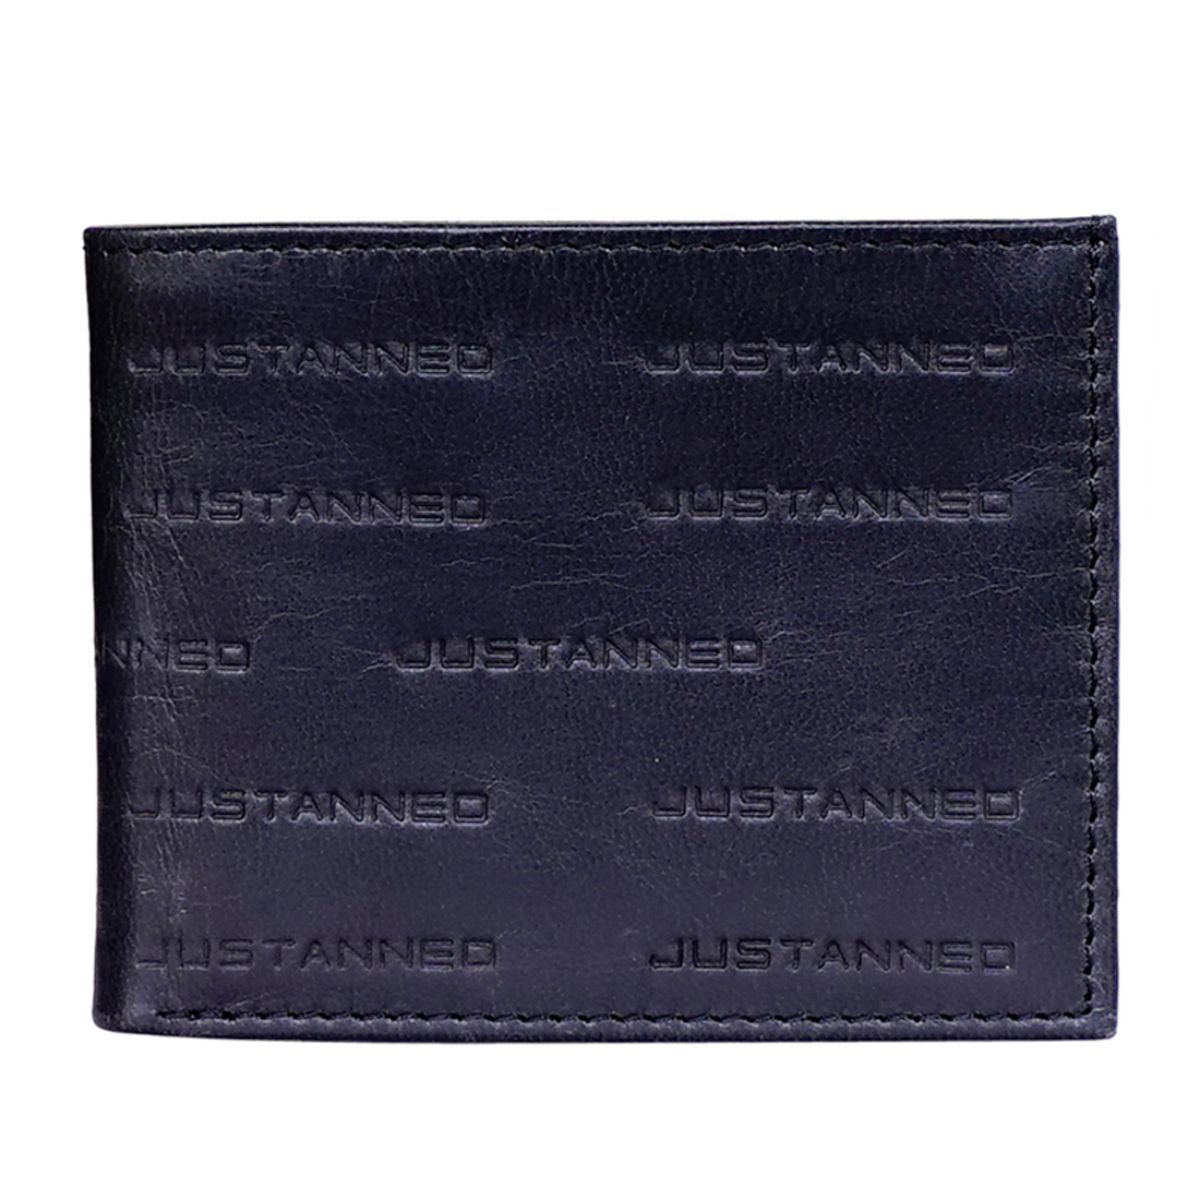 Justanned Men'S Leather Brand Embossed Surface Wallet